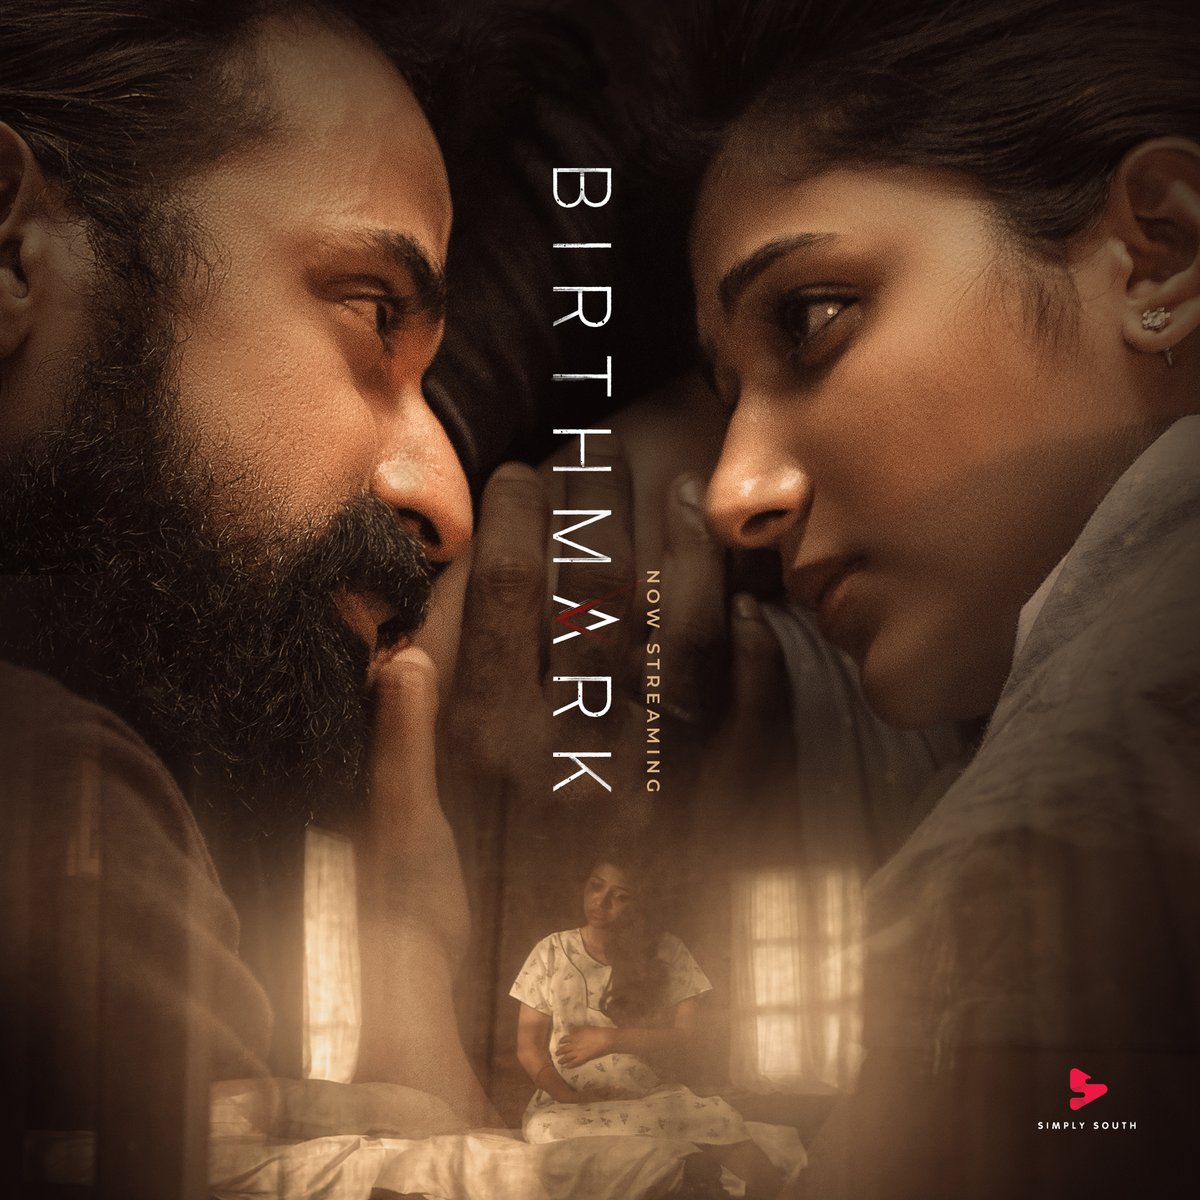 NOW STREAMING: #Birthmark Watch now on Simply South worldwide, excluding India. ▶ simplysouth.tv/birthmark - @actorshabeer | @mirnaaofficial | @Composer_Vishal | #BirthmarkOnSimplySouth